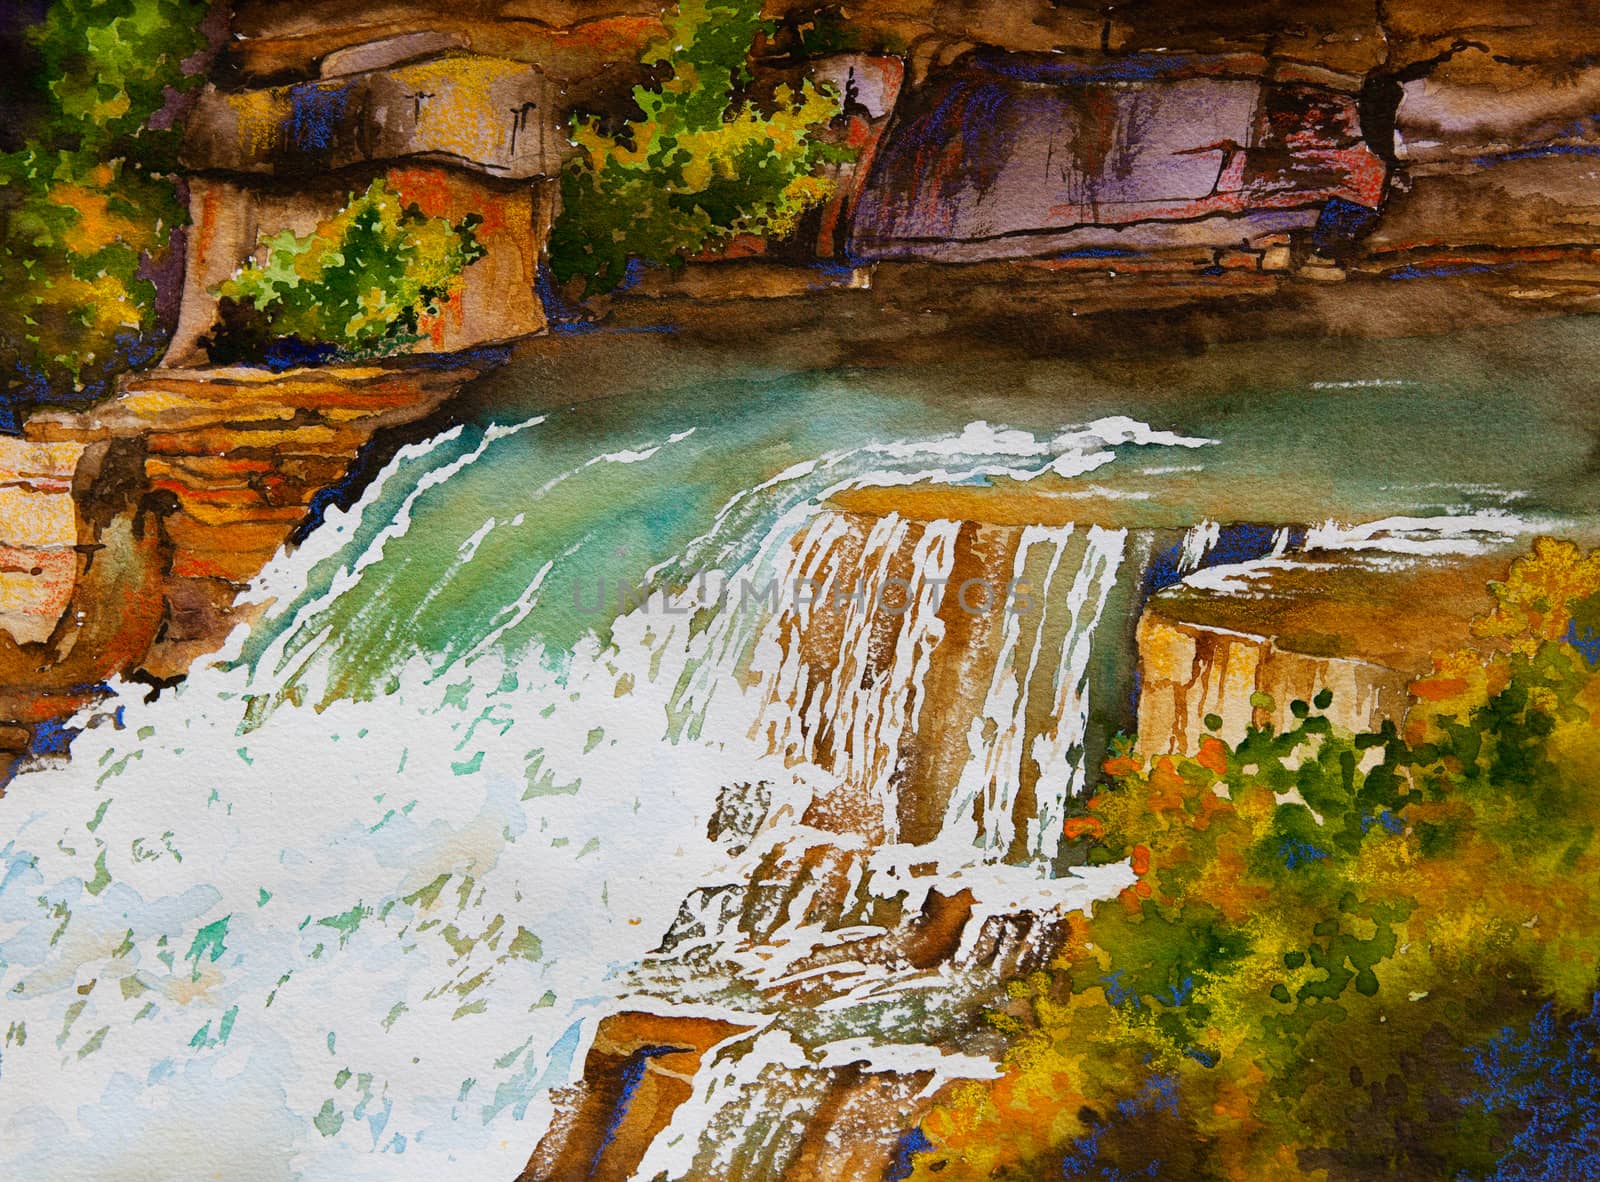 An original watercolor painting of a waterfall landscape, near Markham, Ontario, Canada